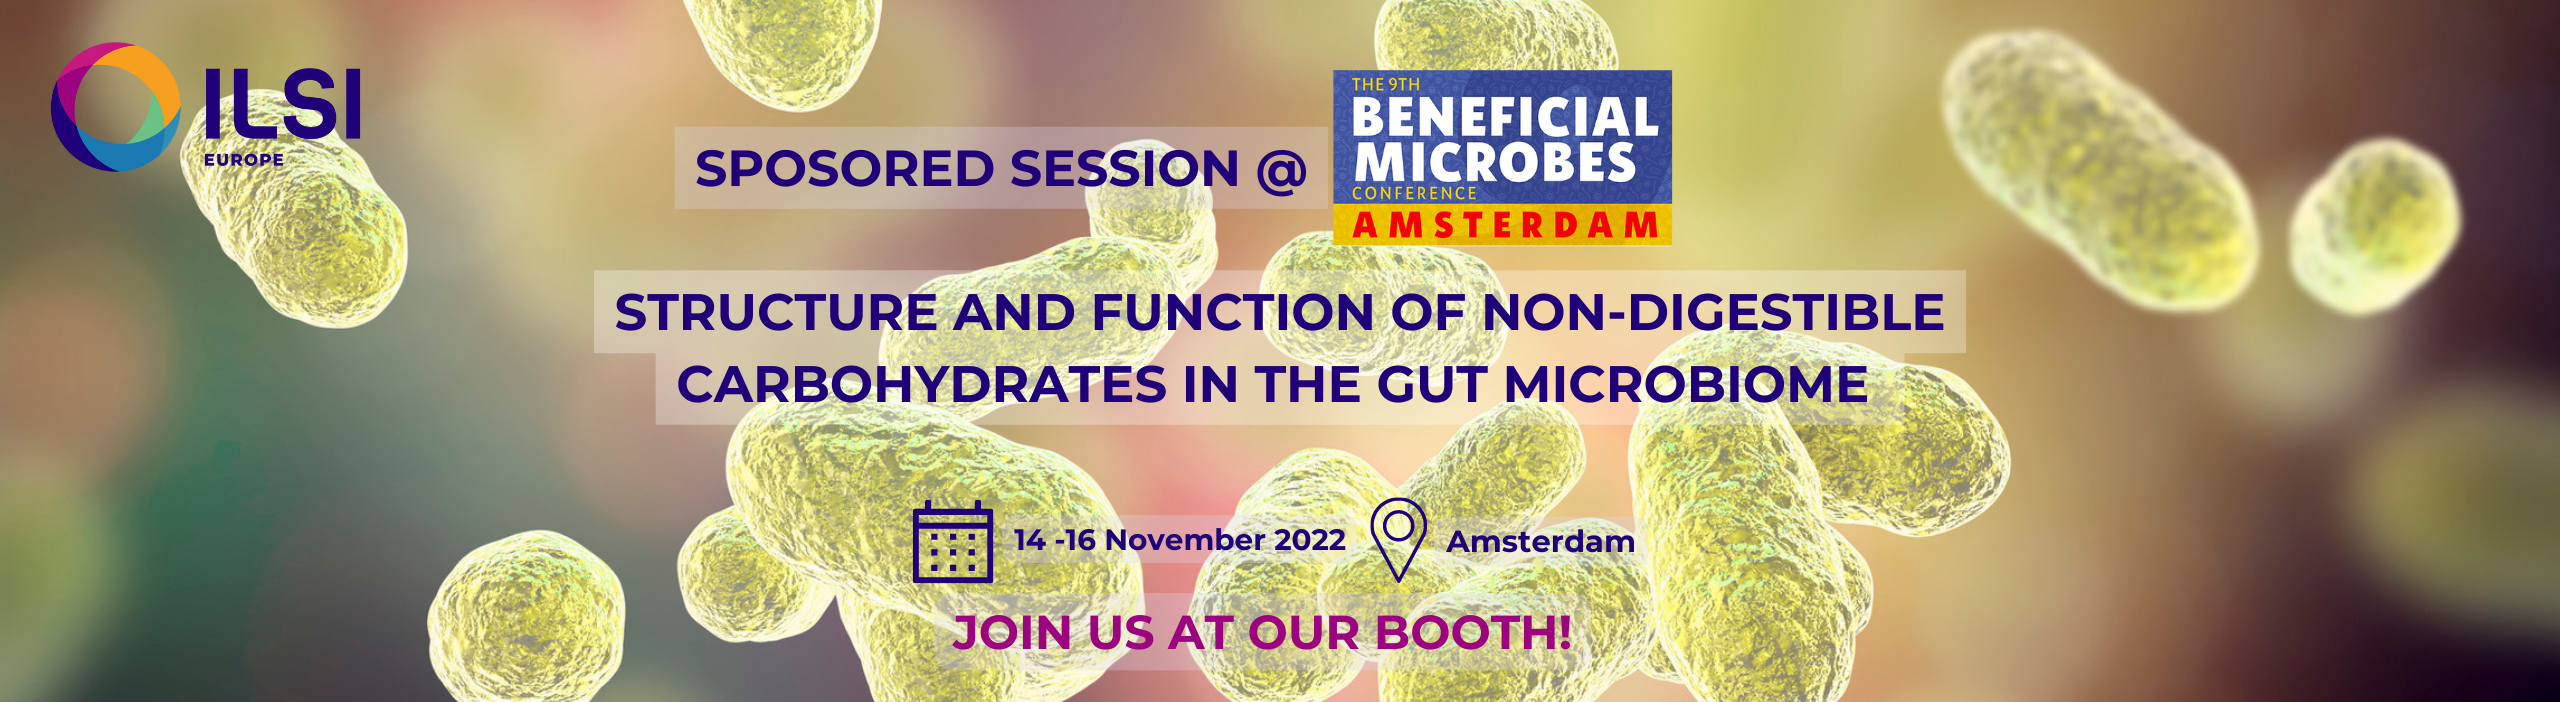 Beneficial Microbes sponsored session banner (1)